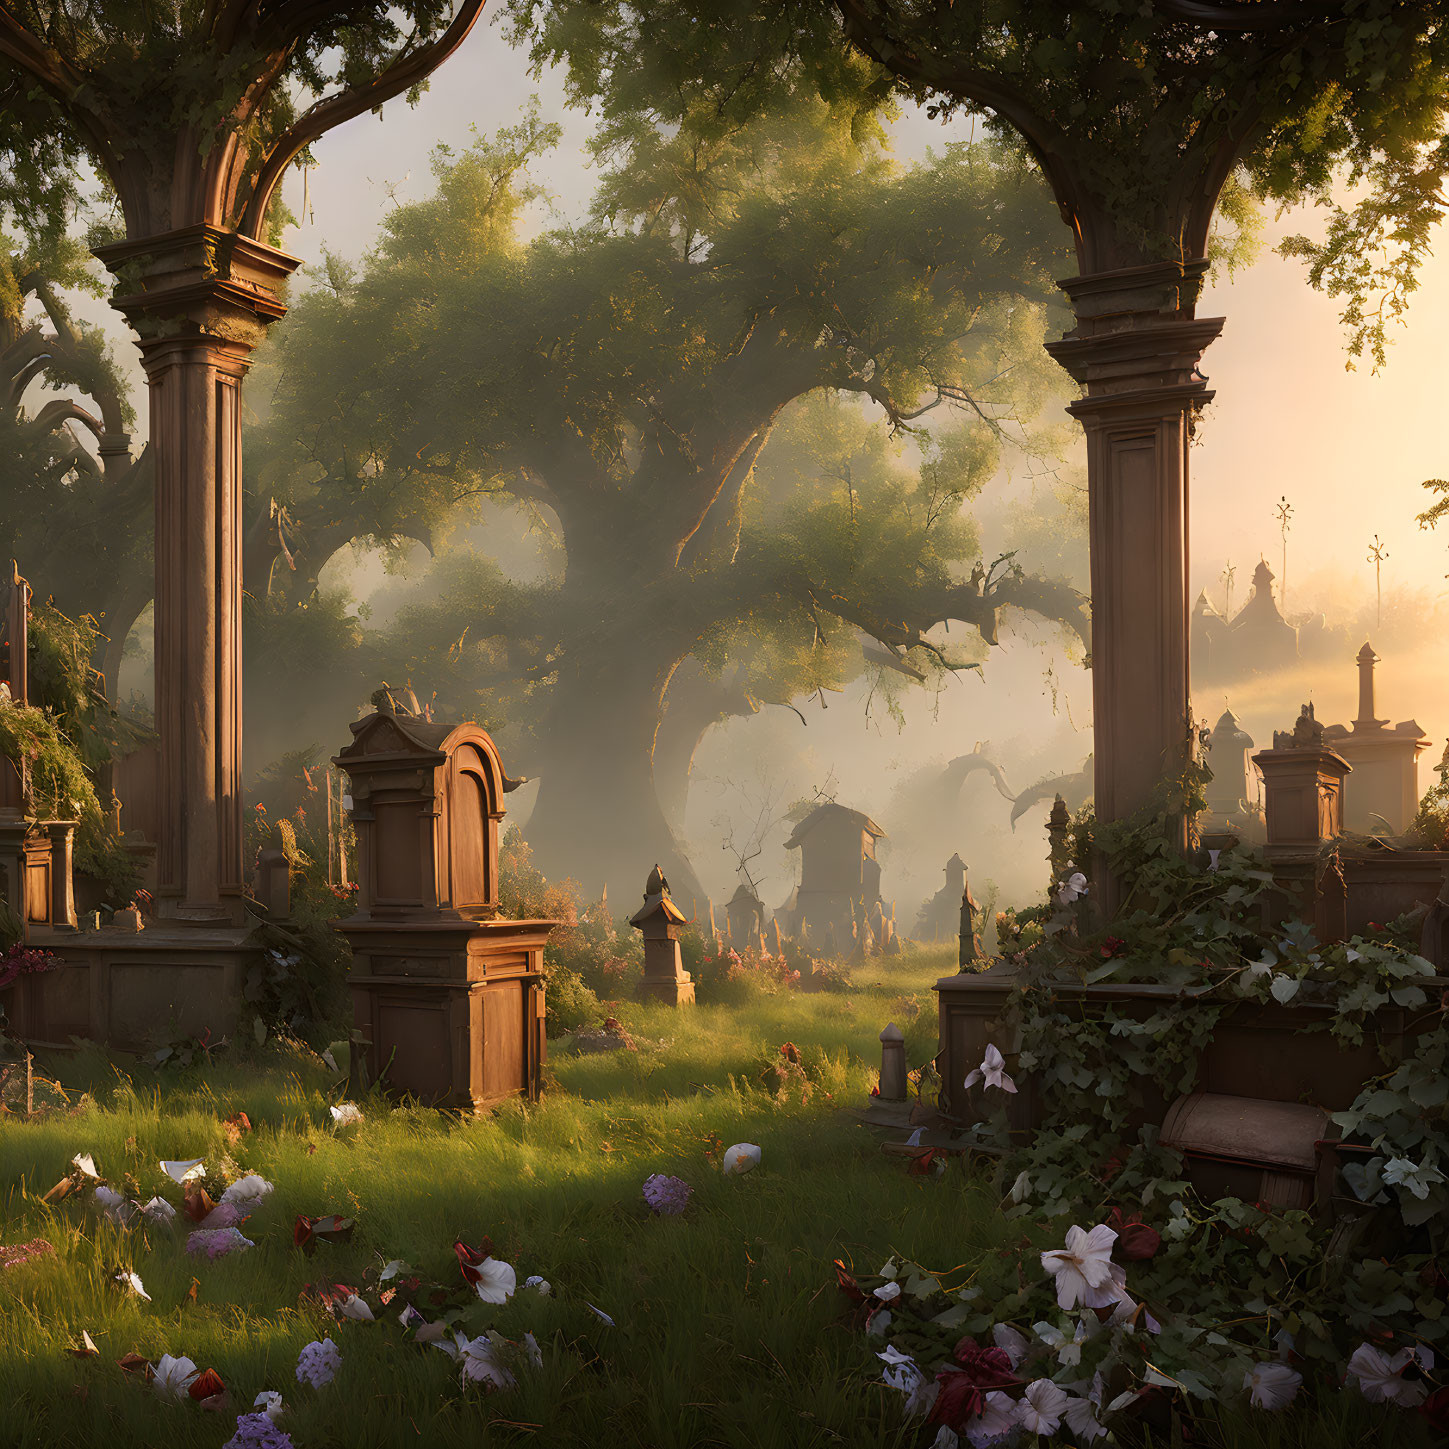 Serene cemetery with ornate tombstones in sunlit setting